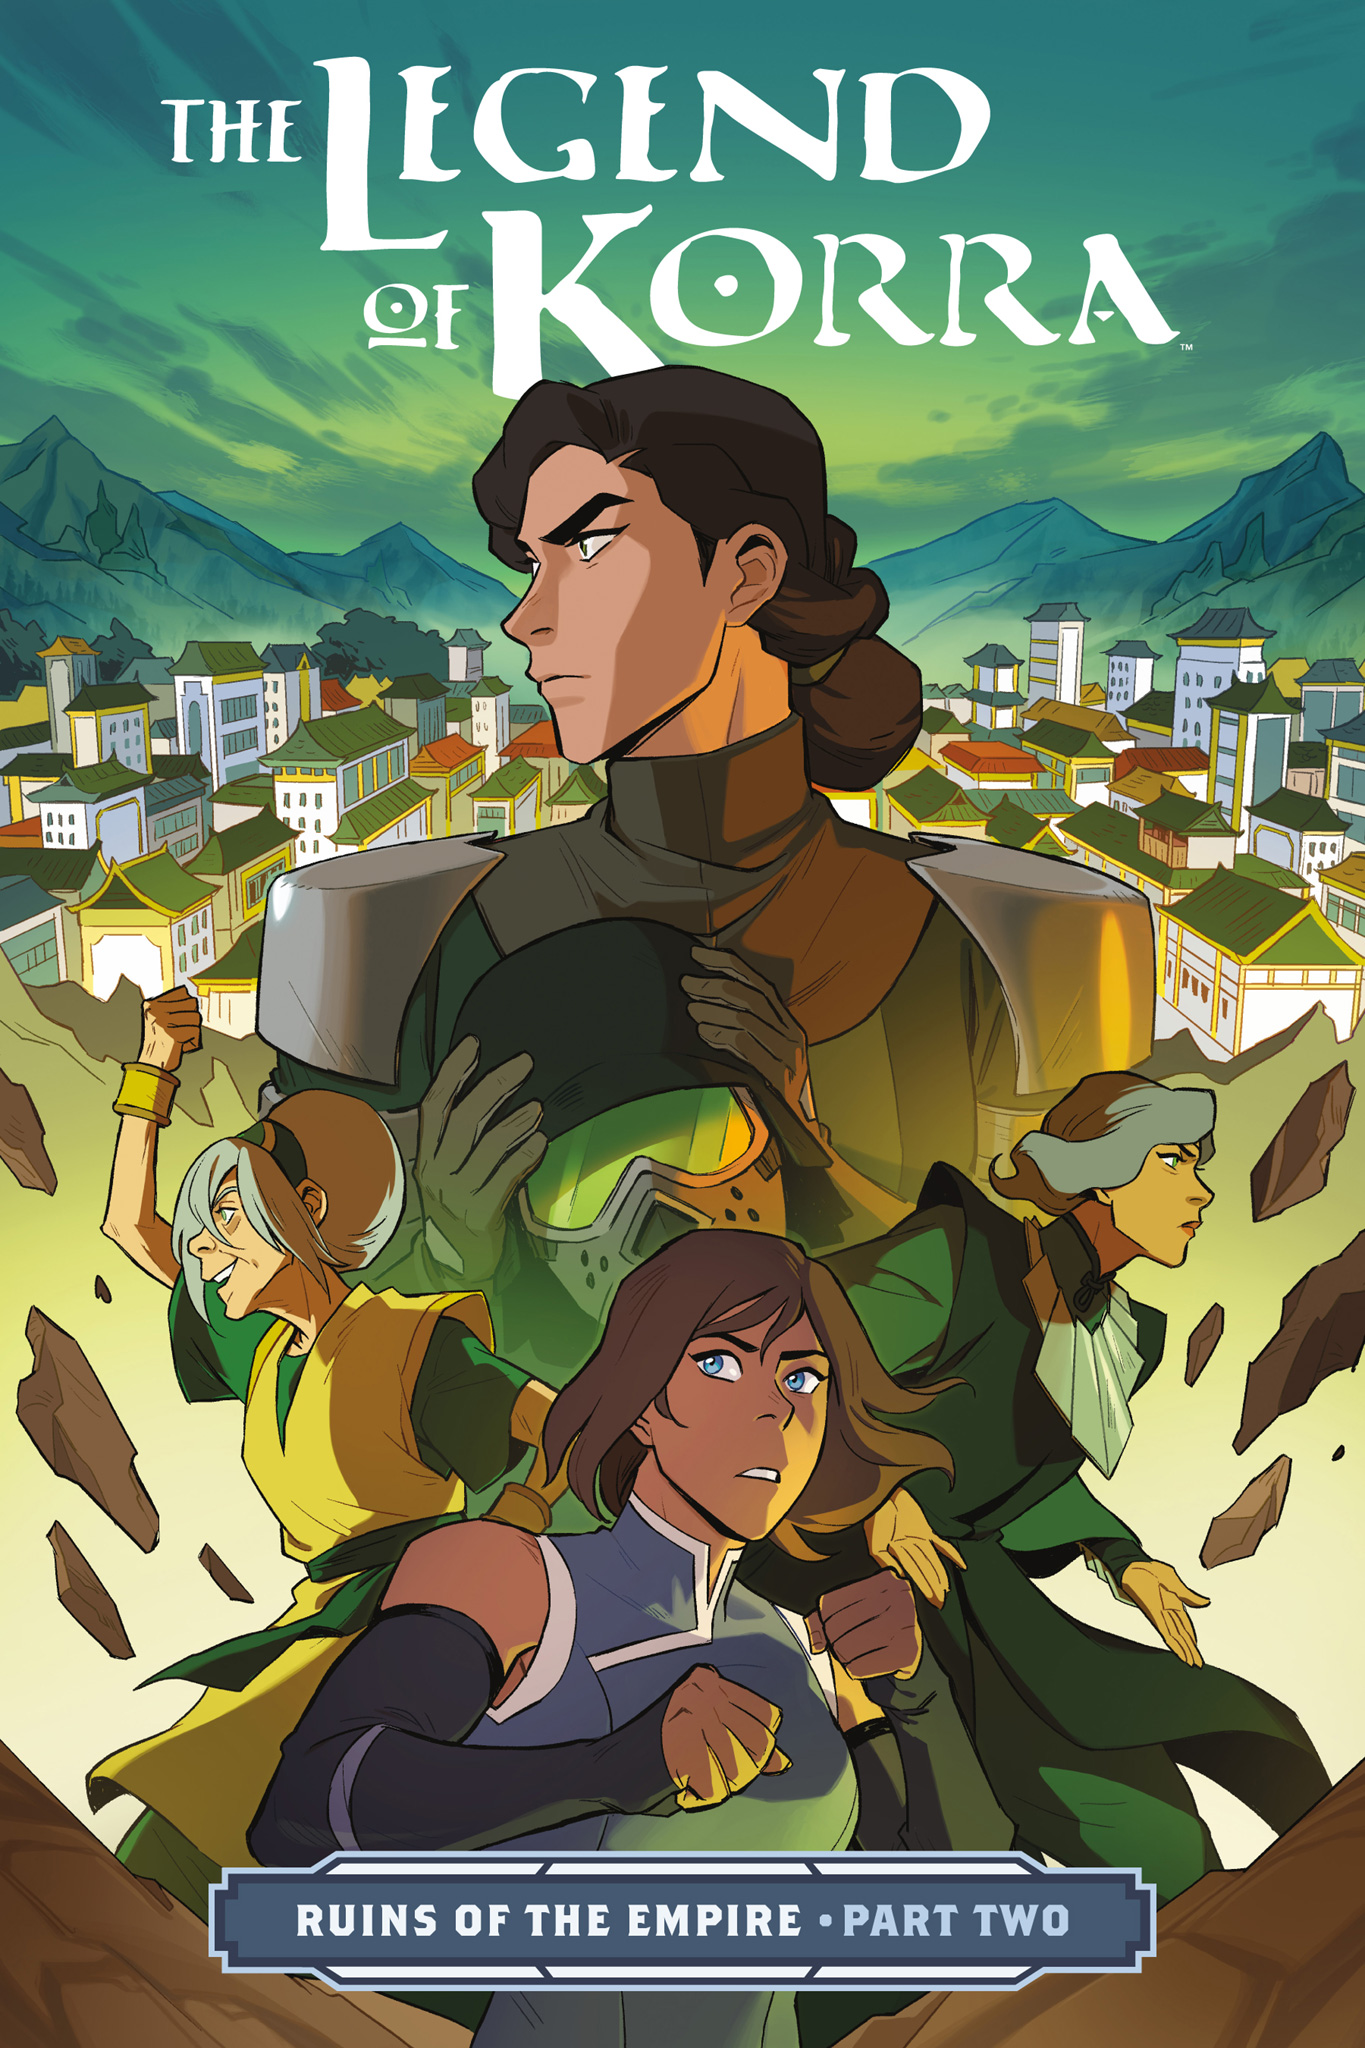 Read online Nickelodeon The Legend of Korra: Ruins of the Empire comic -  Issue # TPB 2 - 1